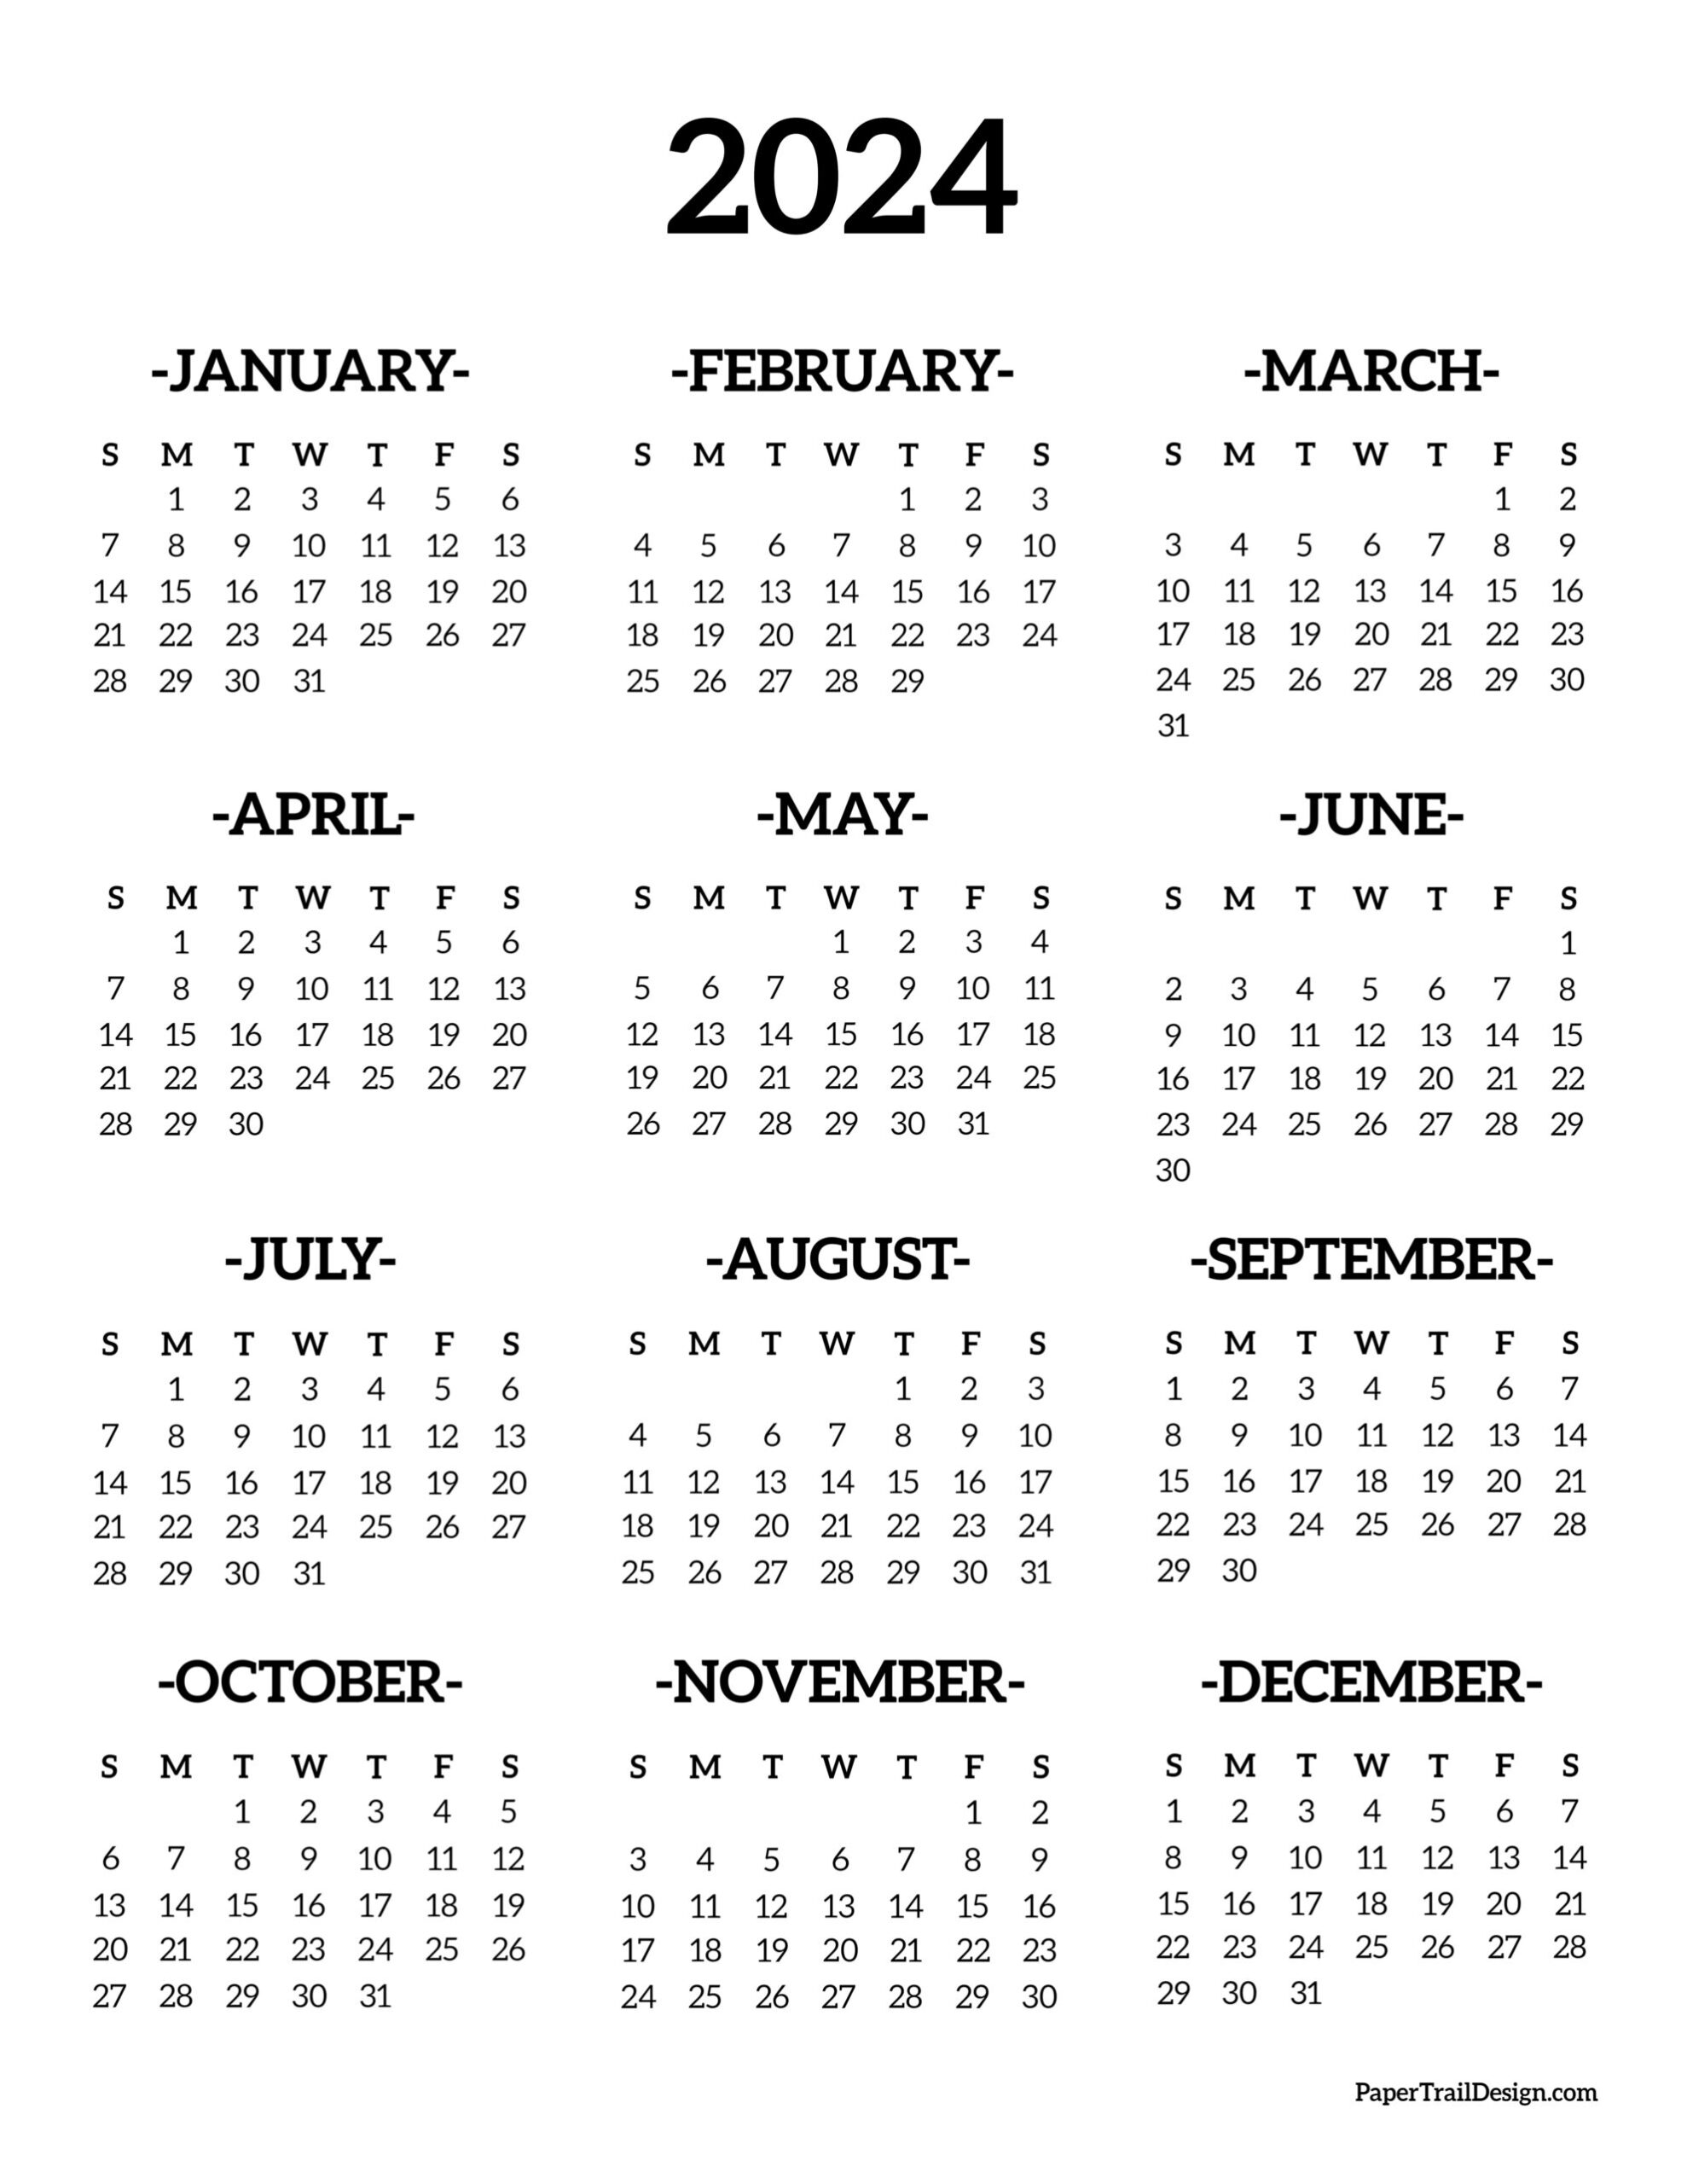 Calendar 2024 Printable One Page - Paper Trail Design for 2024 Calendar Printable Year